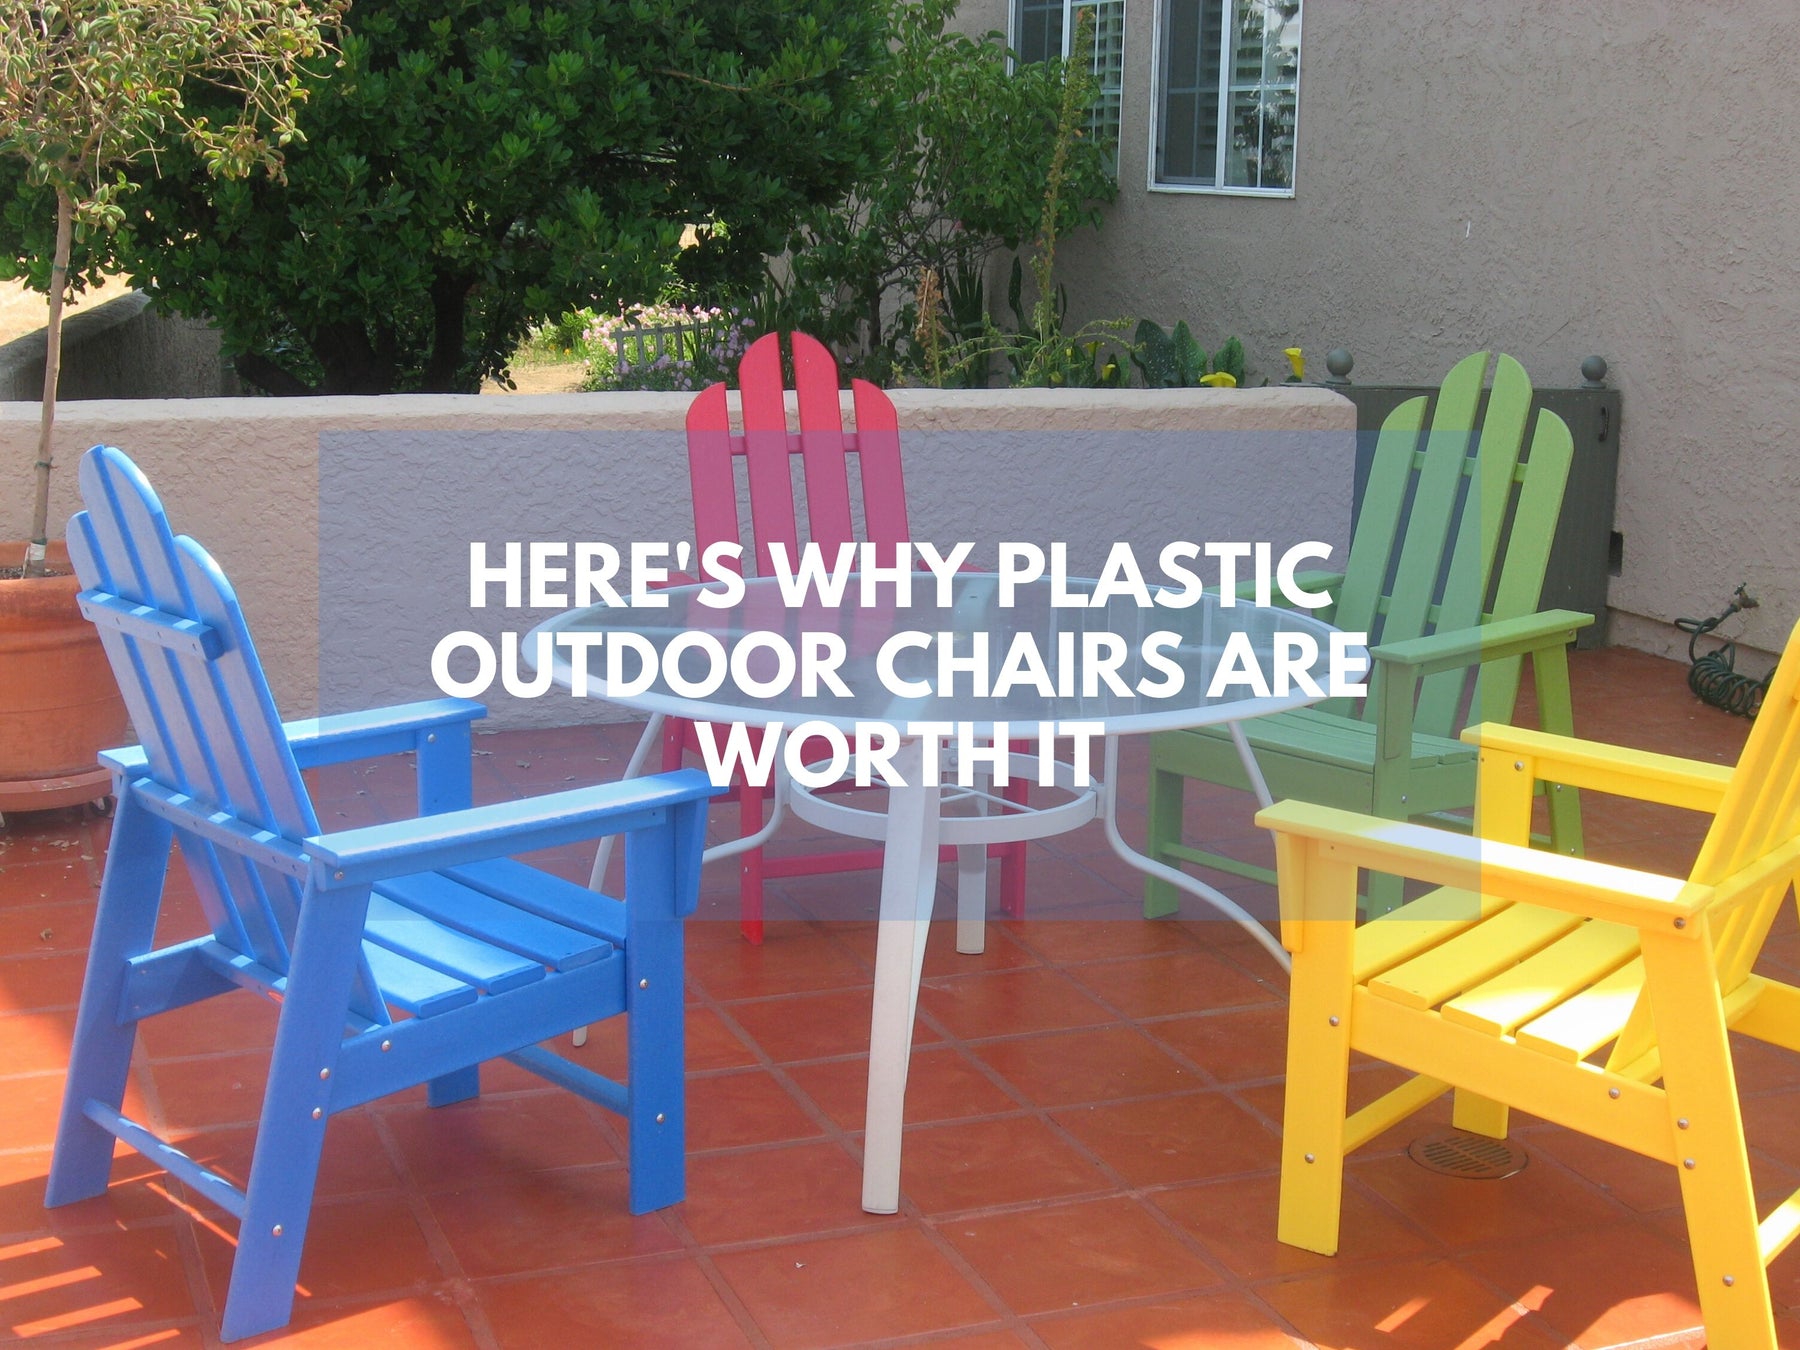 Recycled plastic outdoor chairs